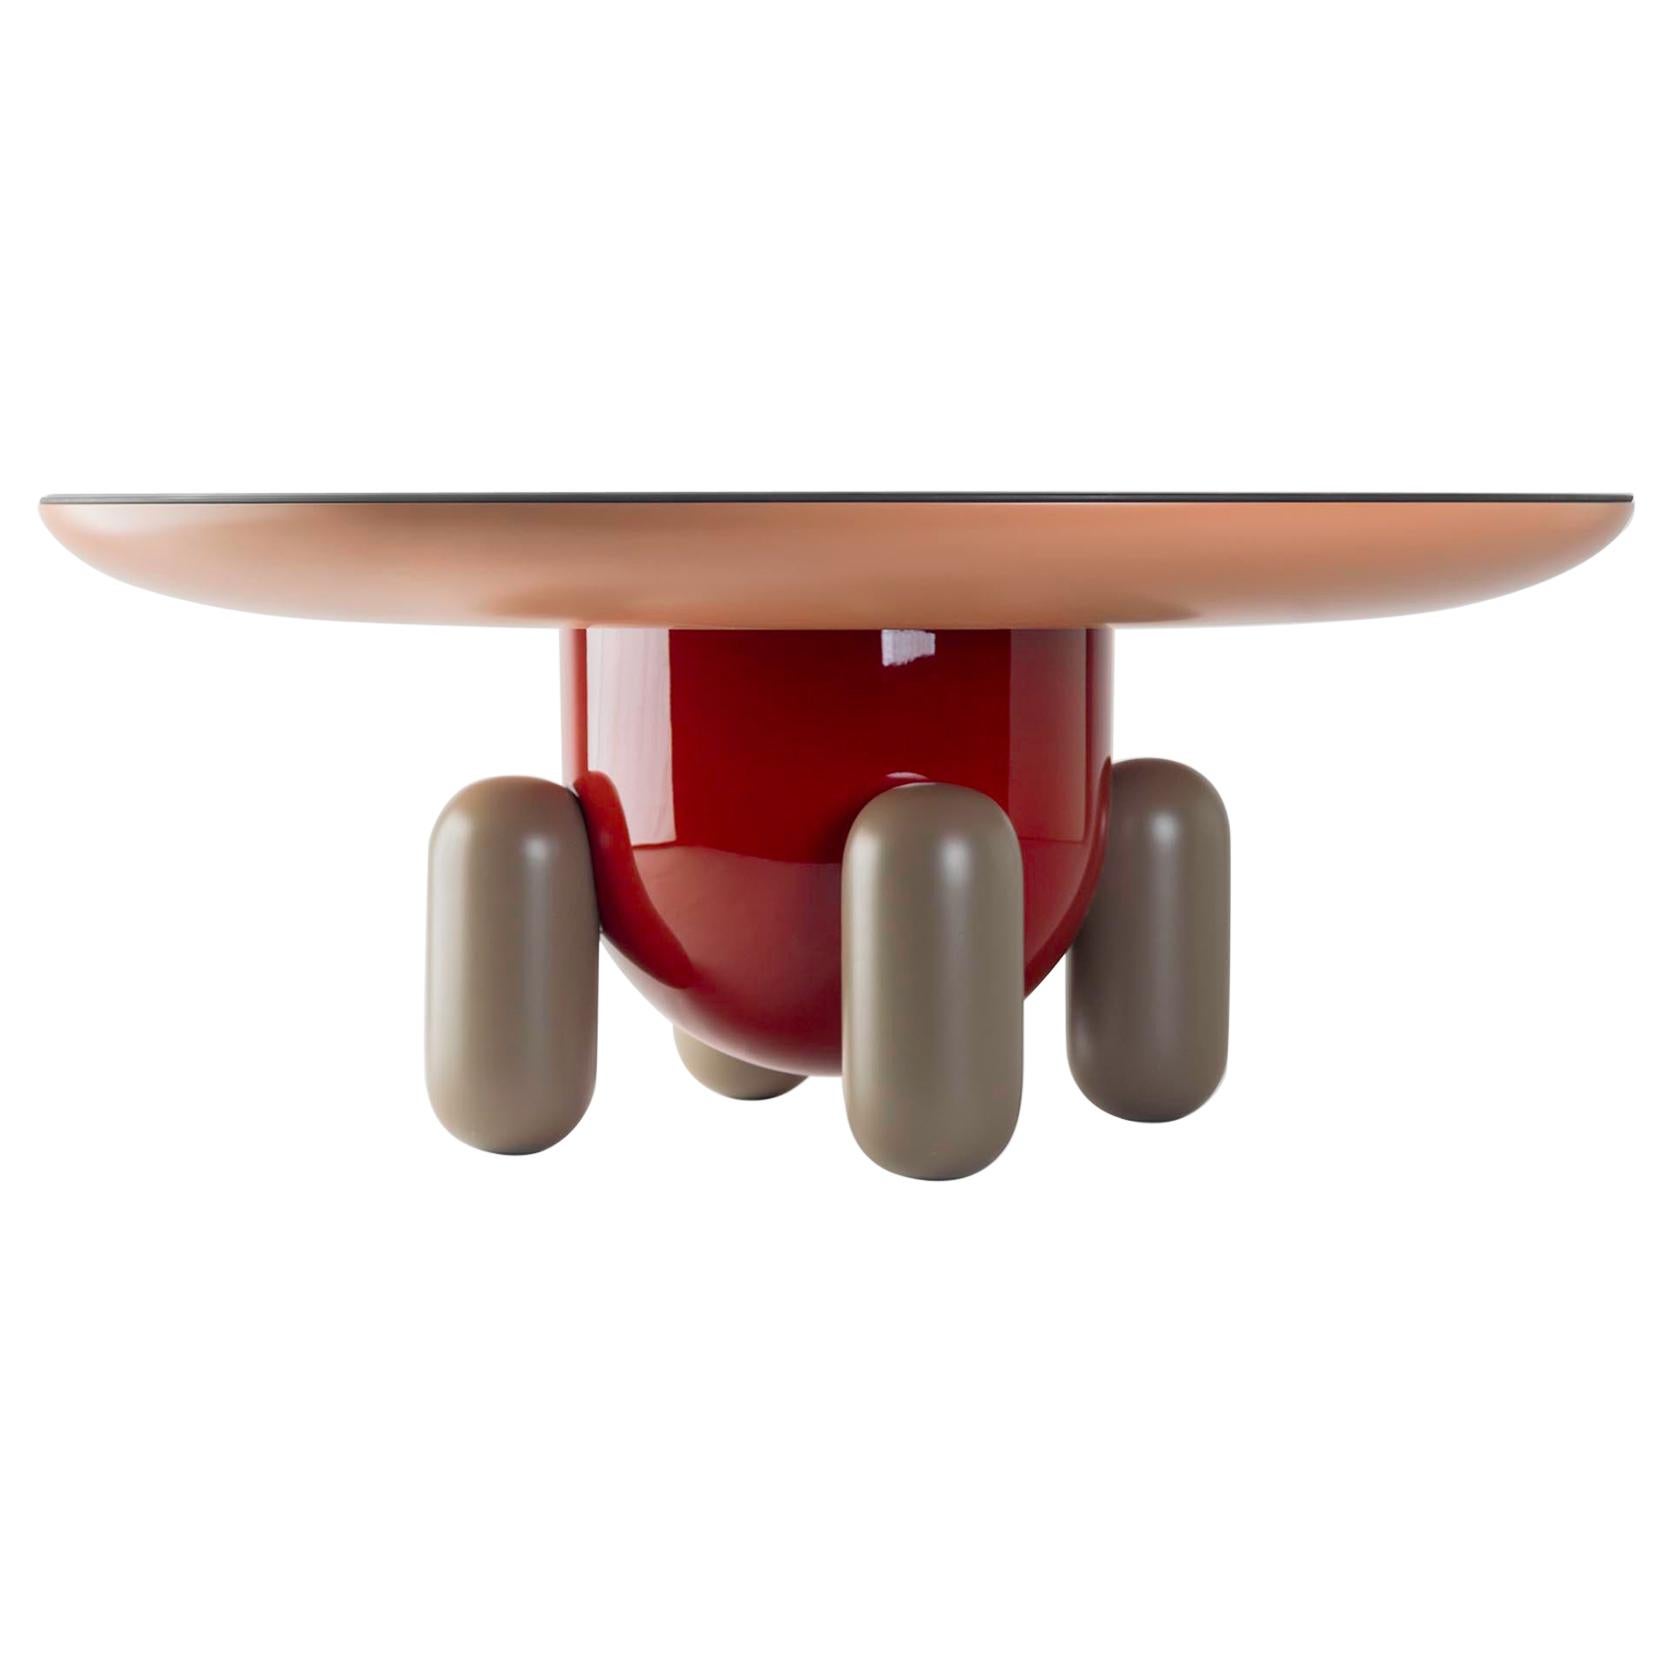 Round Coffee table by Jaime Hayon, "Explorer" series, red lacquered fibreglass  For Sale